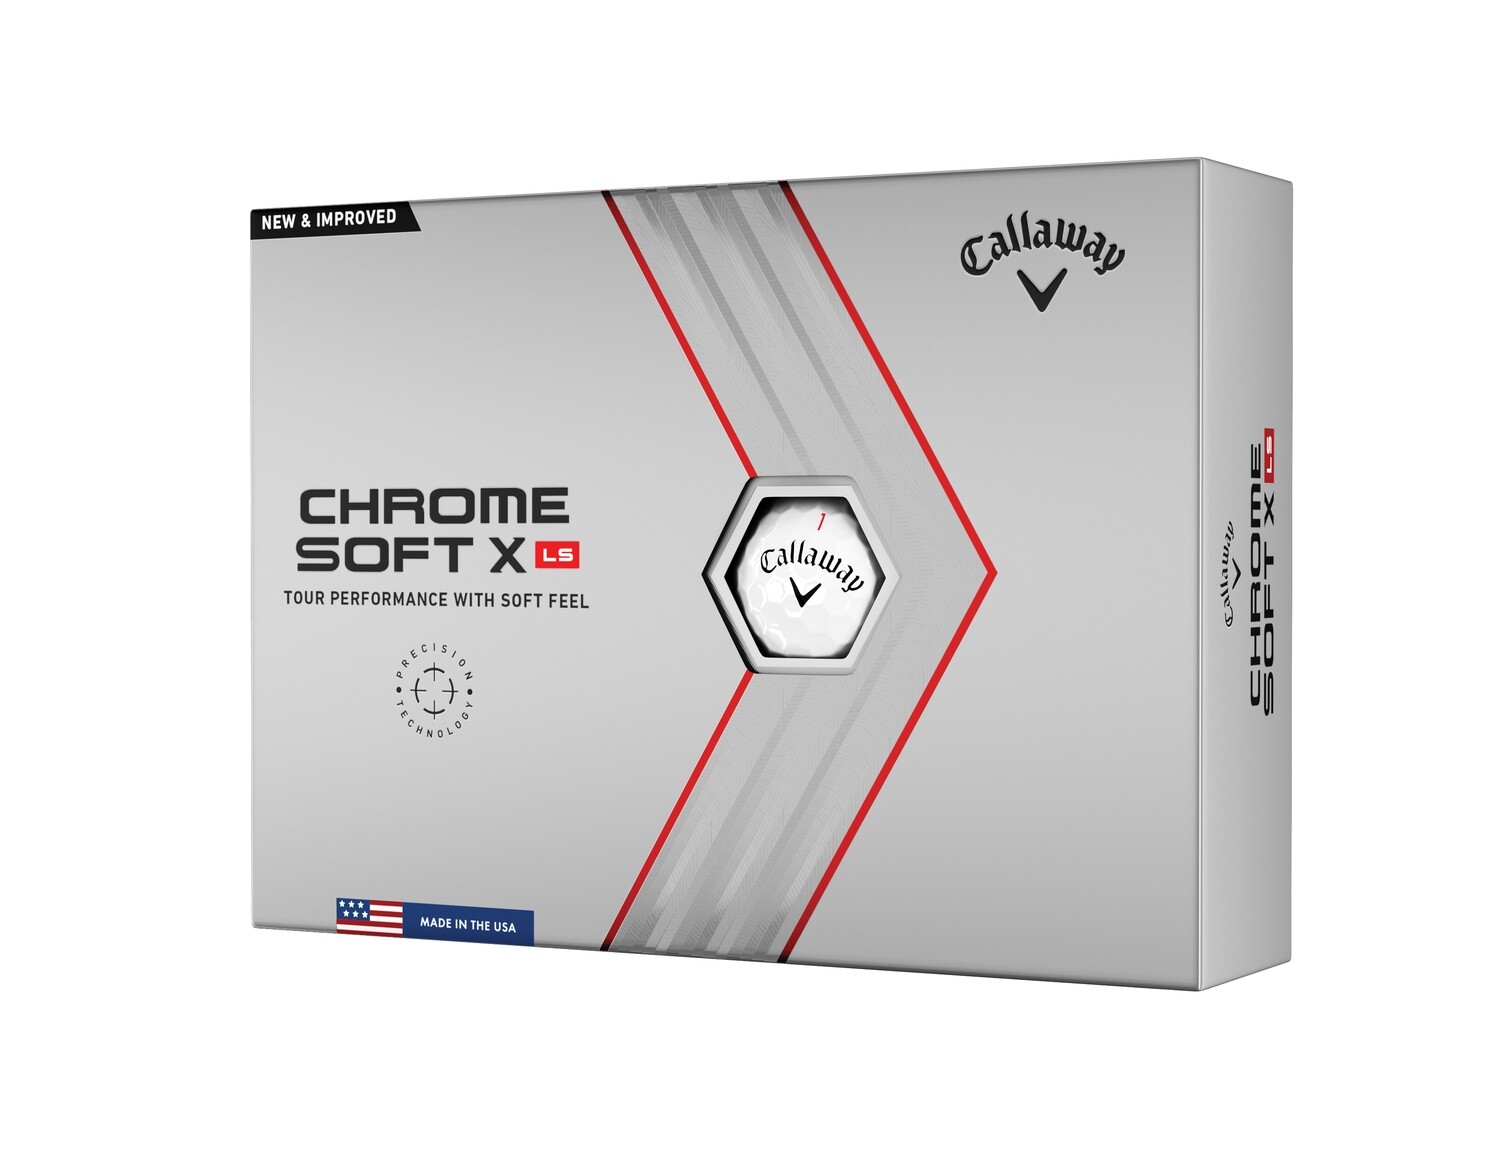 [PERSONALIZED] Callaway Chrome Soft X LS 2022